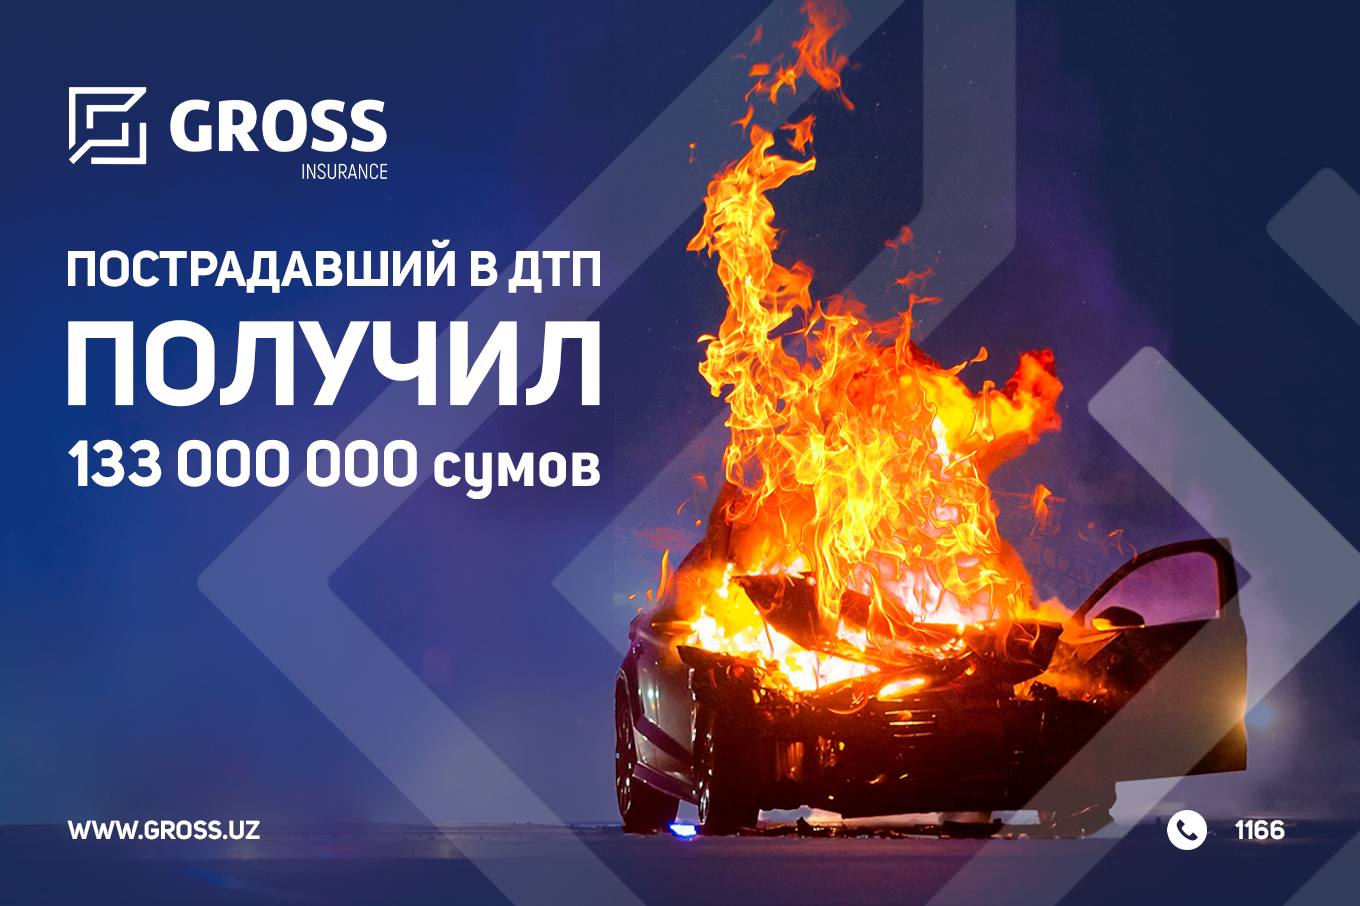 THE VICTIM OF THE ACCIDENT RECEIVED 133 MILLION SOUMS FROM THE INSURANCE COMPANY GROSS INSURANCE 